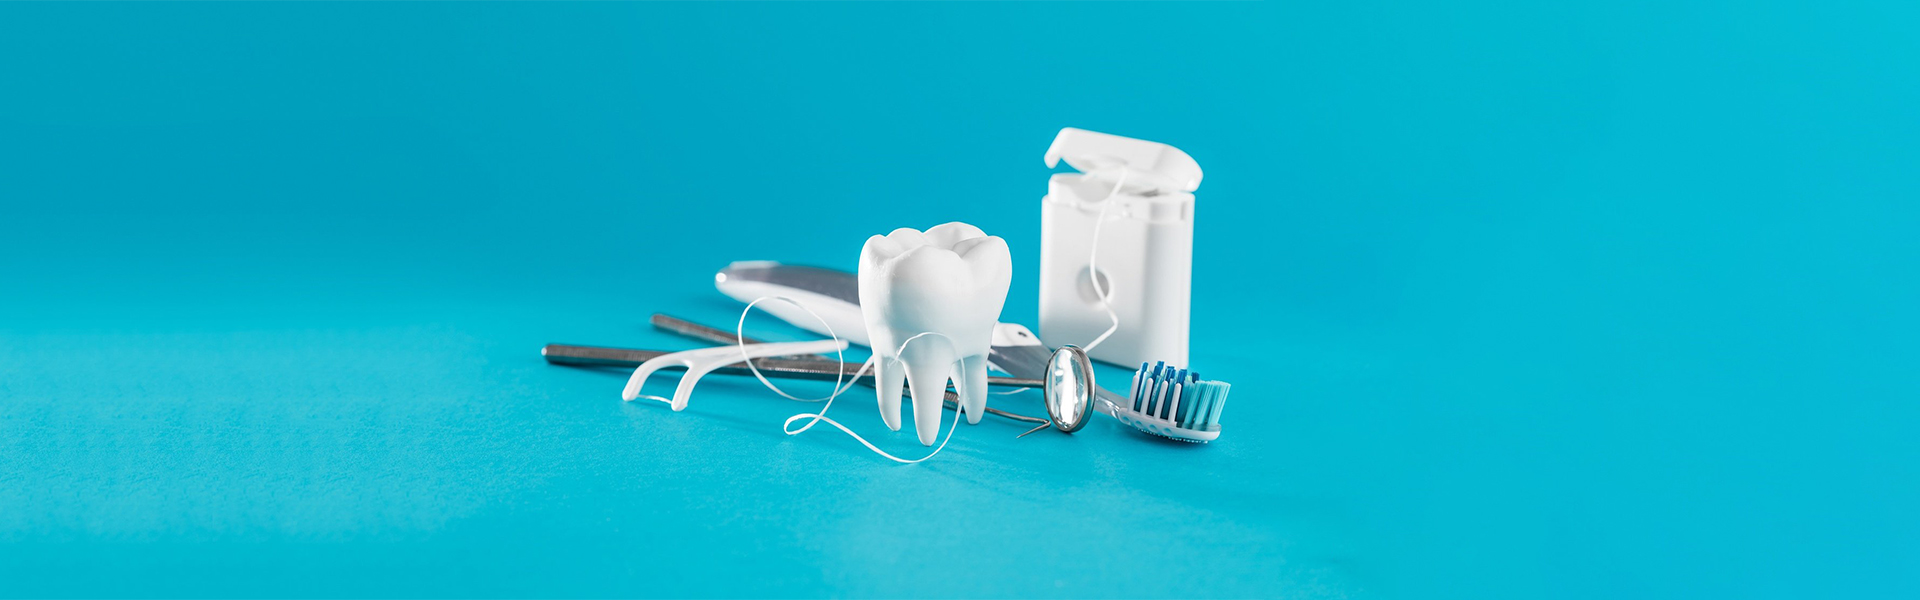 Saturday Dentist: What are The Benefits and Services Included?